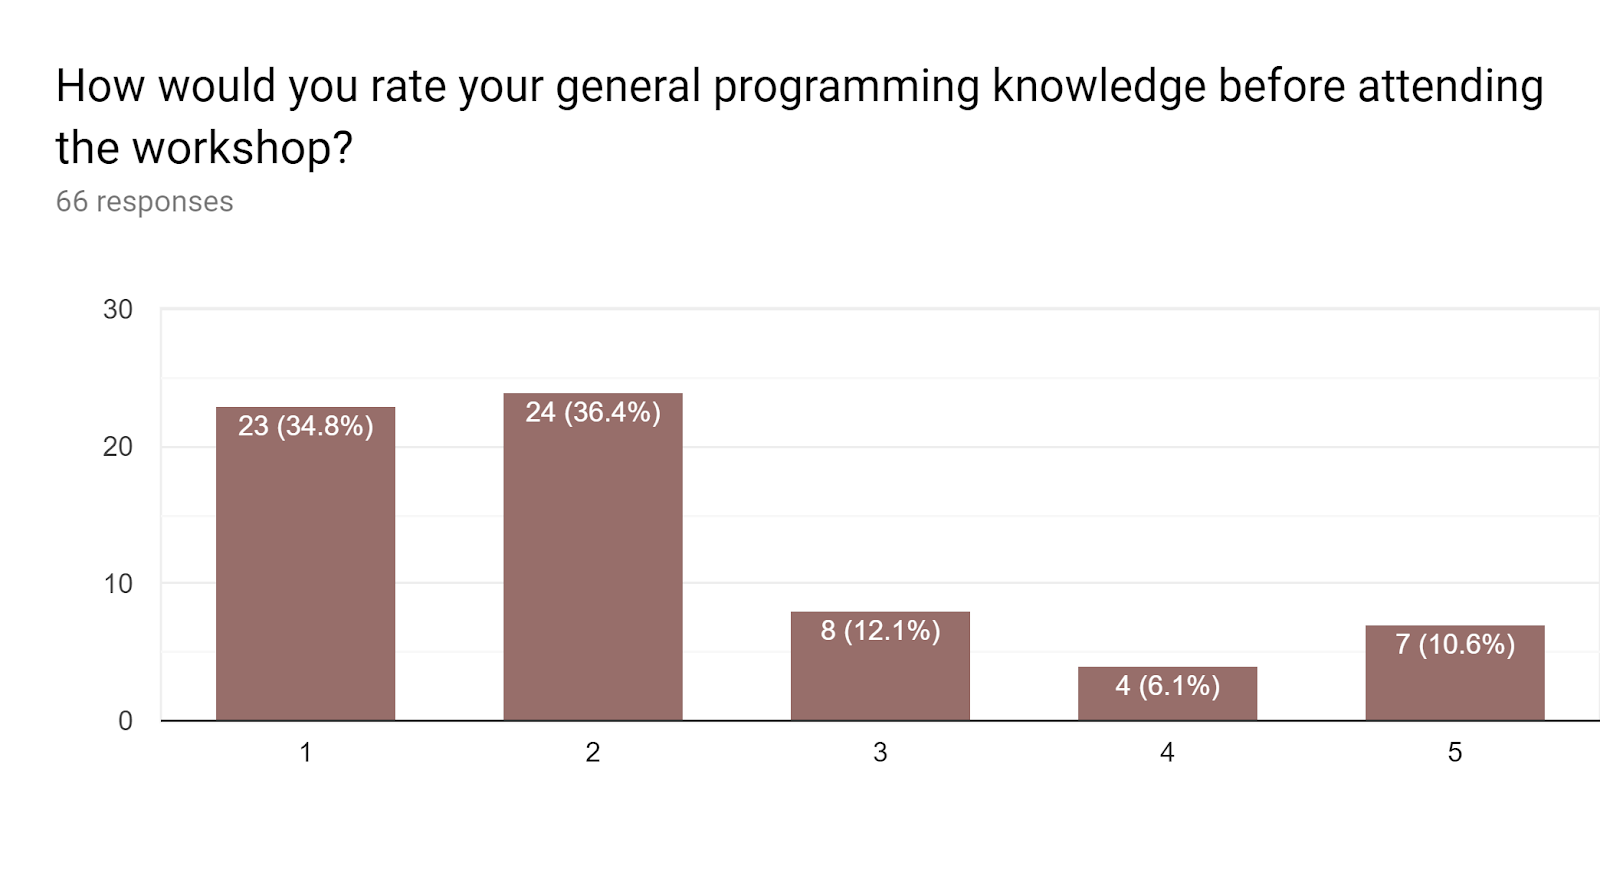 Programming knowledge prior to the workshop: 1: 34.8%; 2: 36.4%; 3: 12.1%; 4: 6.1%; 5: 10.6%